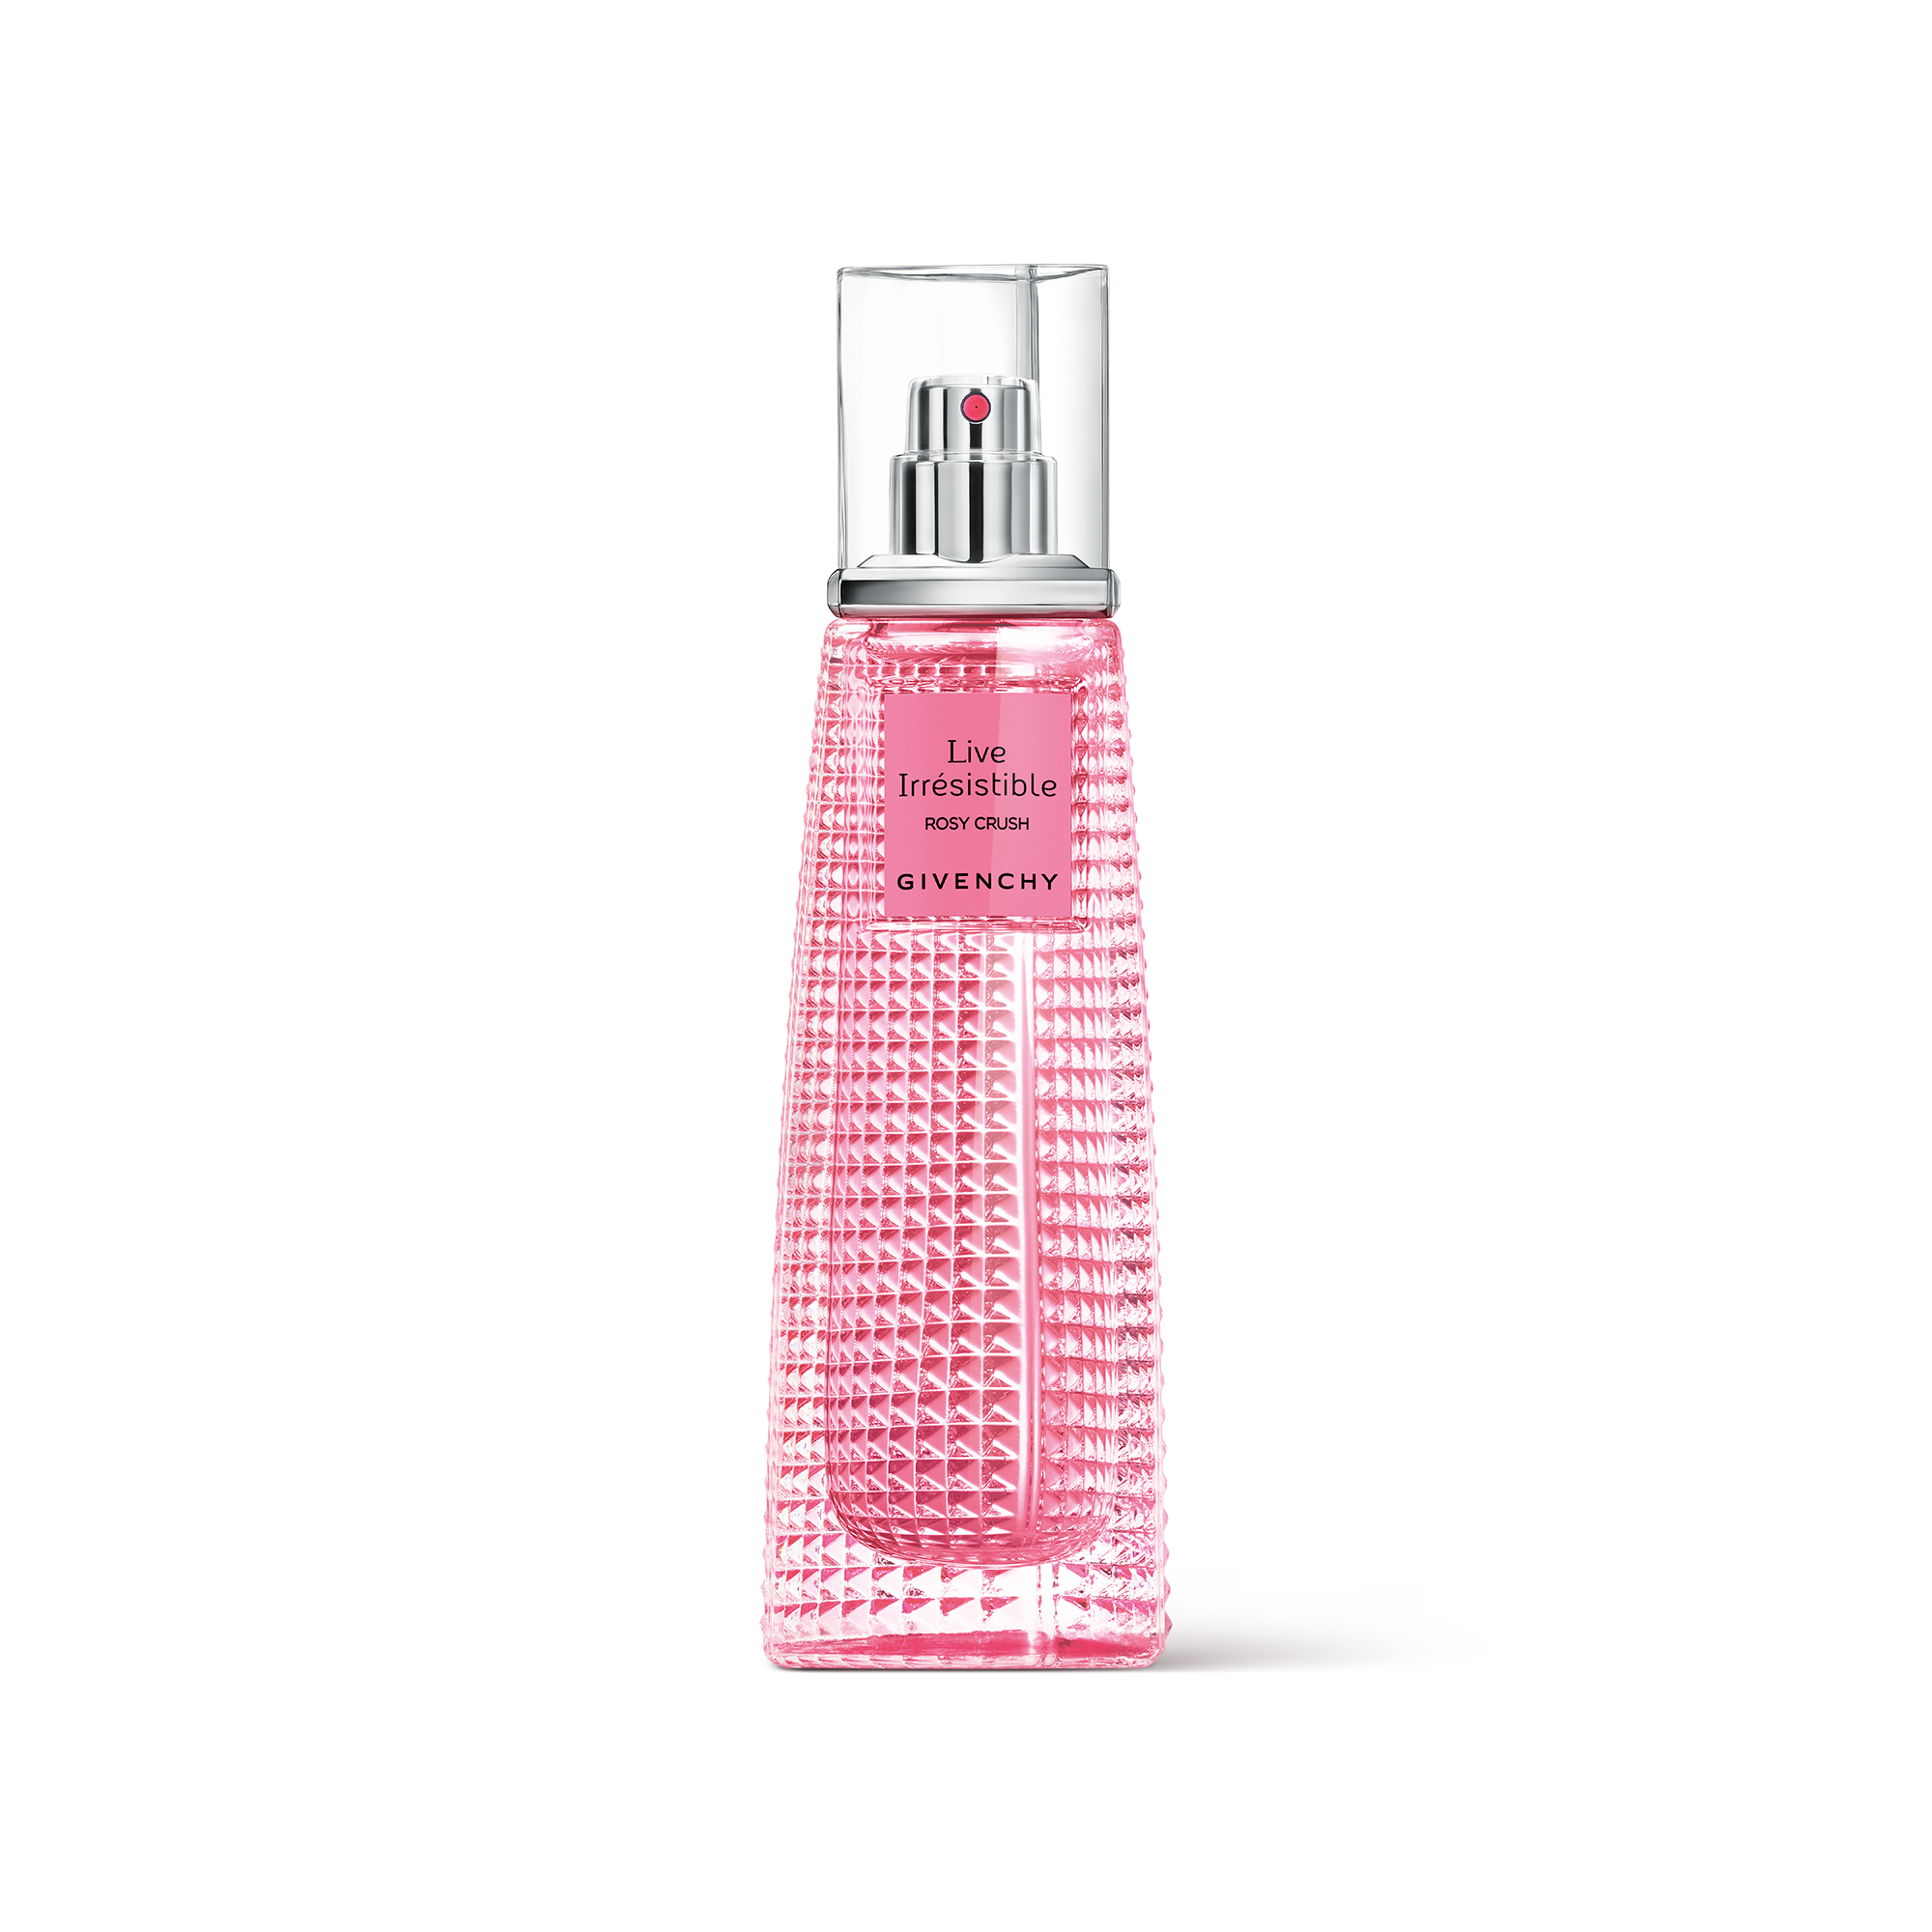 live irresistible givenchy rosy crush